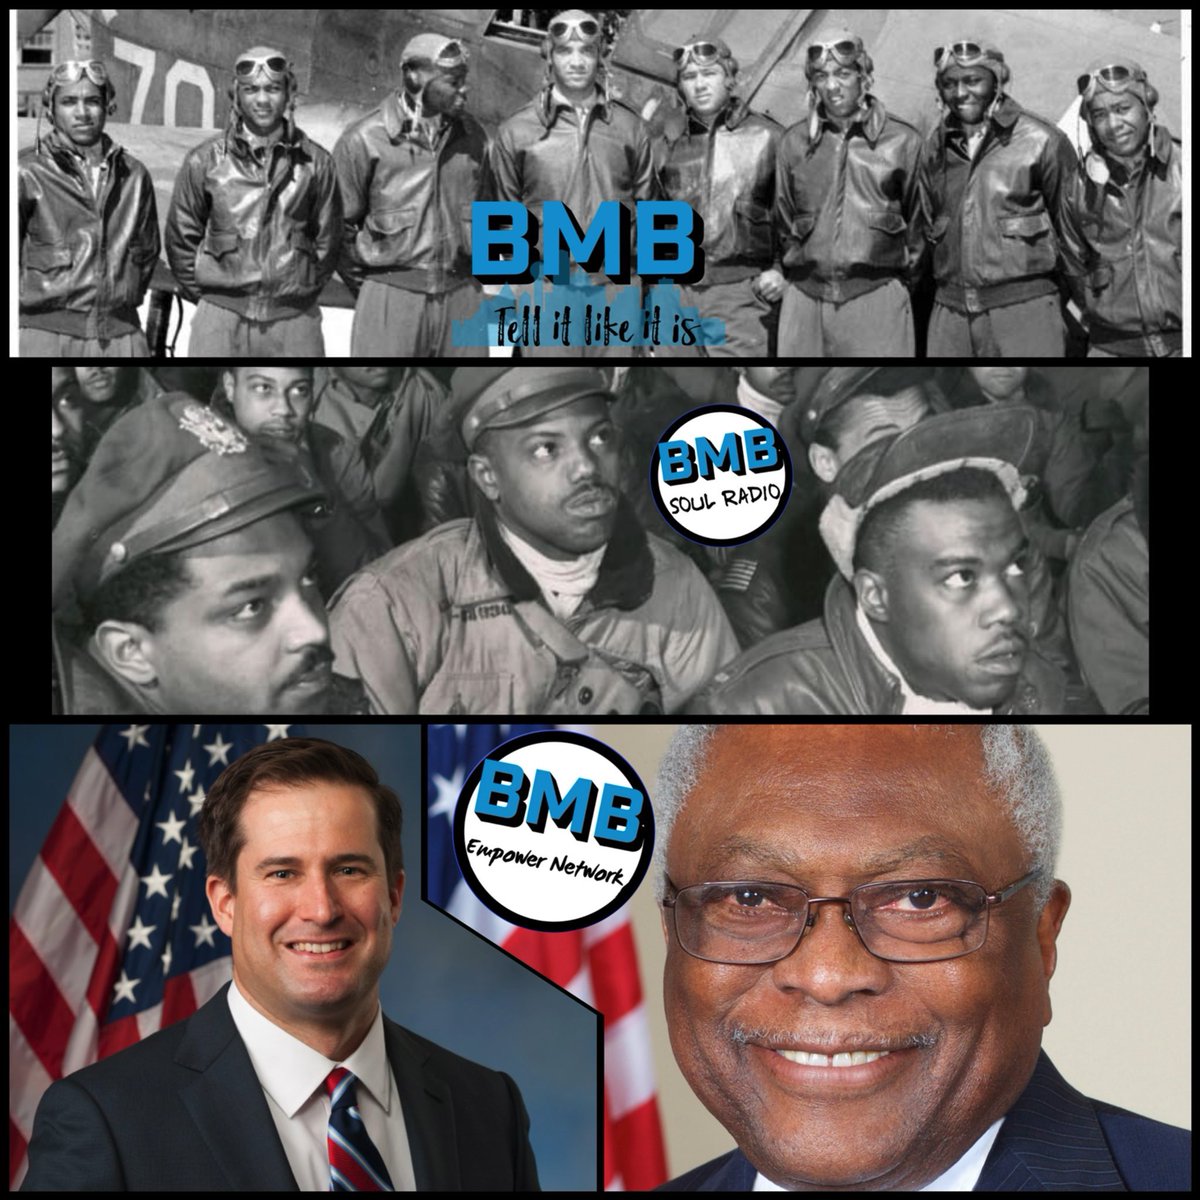 #JamesClyburn & Rep. #SethMoulton would provide #GIBill benefits to descendants of Black #WorldWarII vets. transferable benefit that could be used to obtain housing, attend college or start a business.
#MemorialDay #nbcnews #passthebill